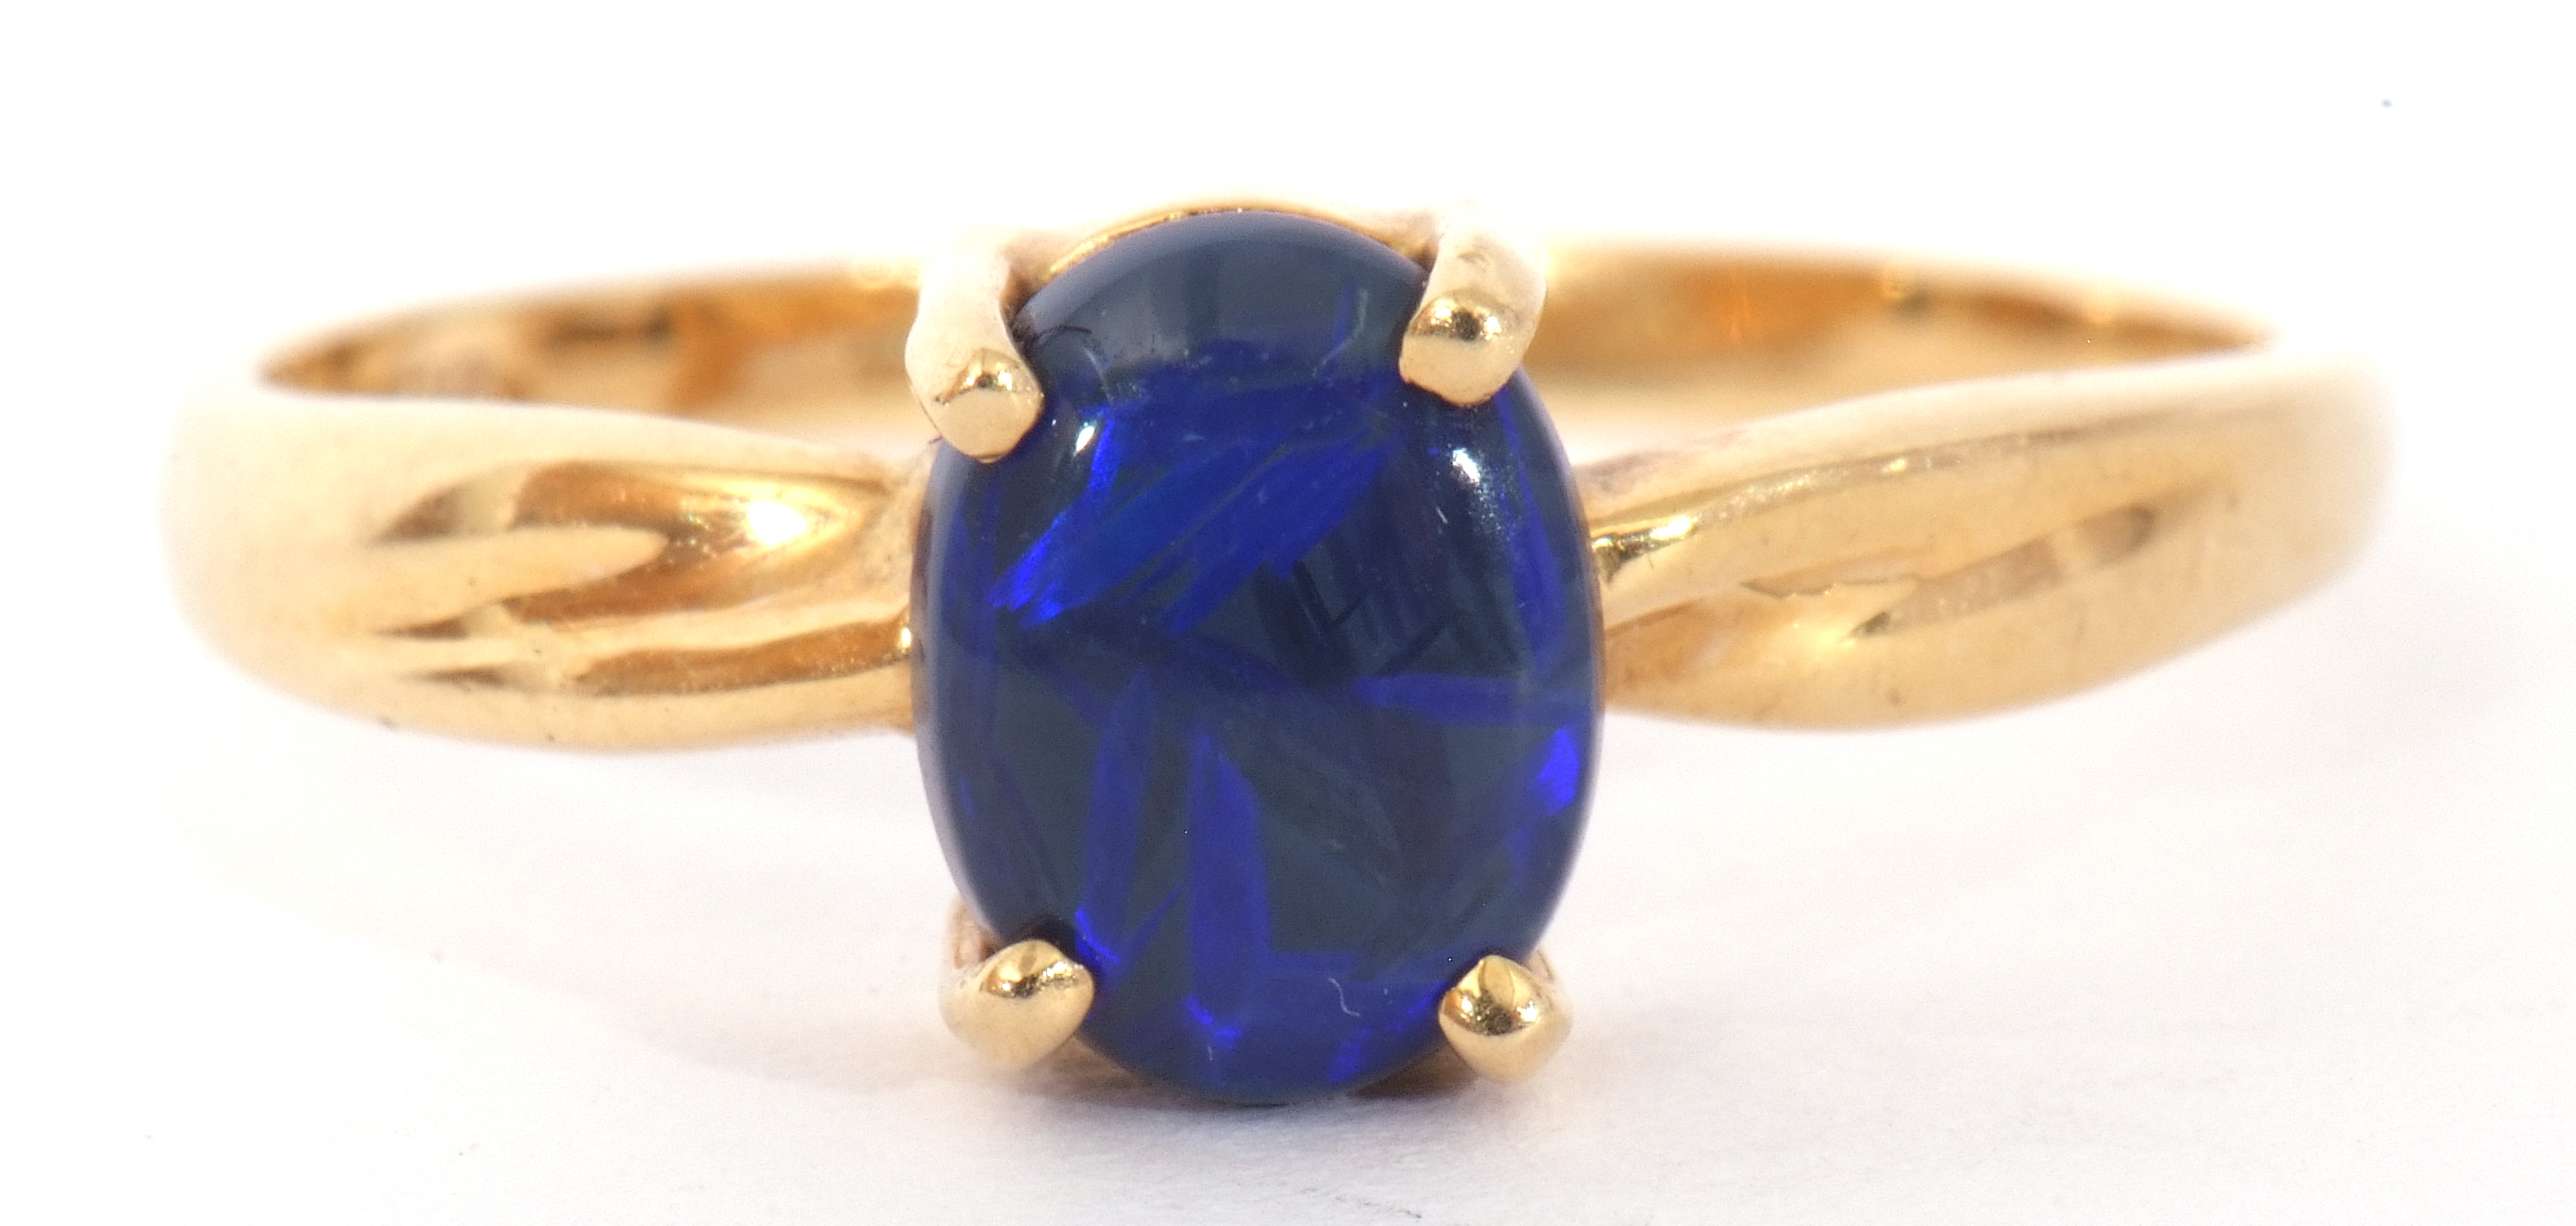 Modern black opal doublet ring, the oval shaped opal is four claw set and raised in a plain polished